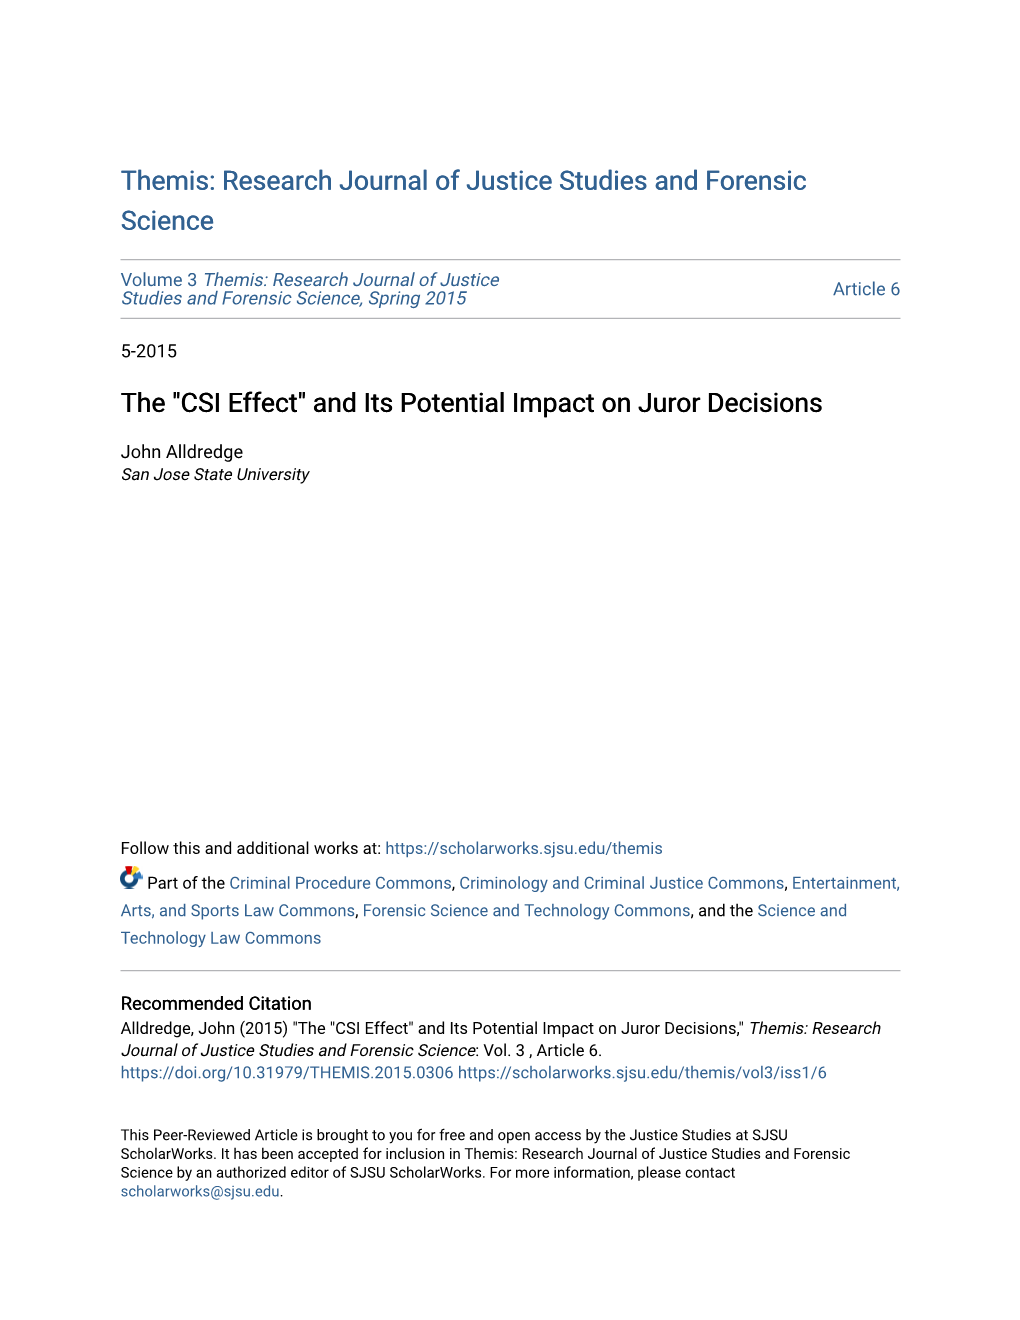 CSI Effect" and Its Potential Impact on Juror Decisions